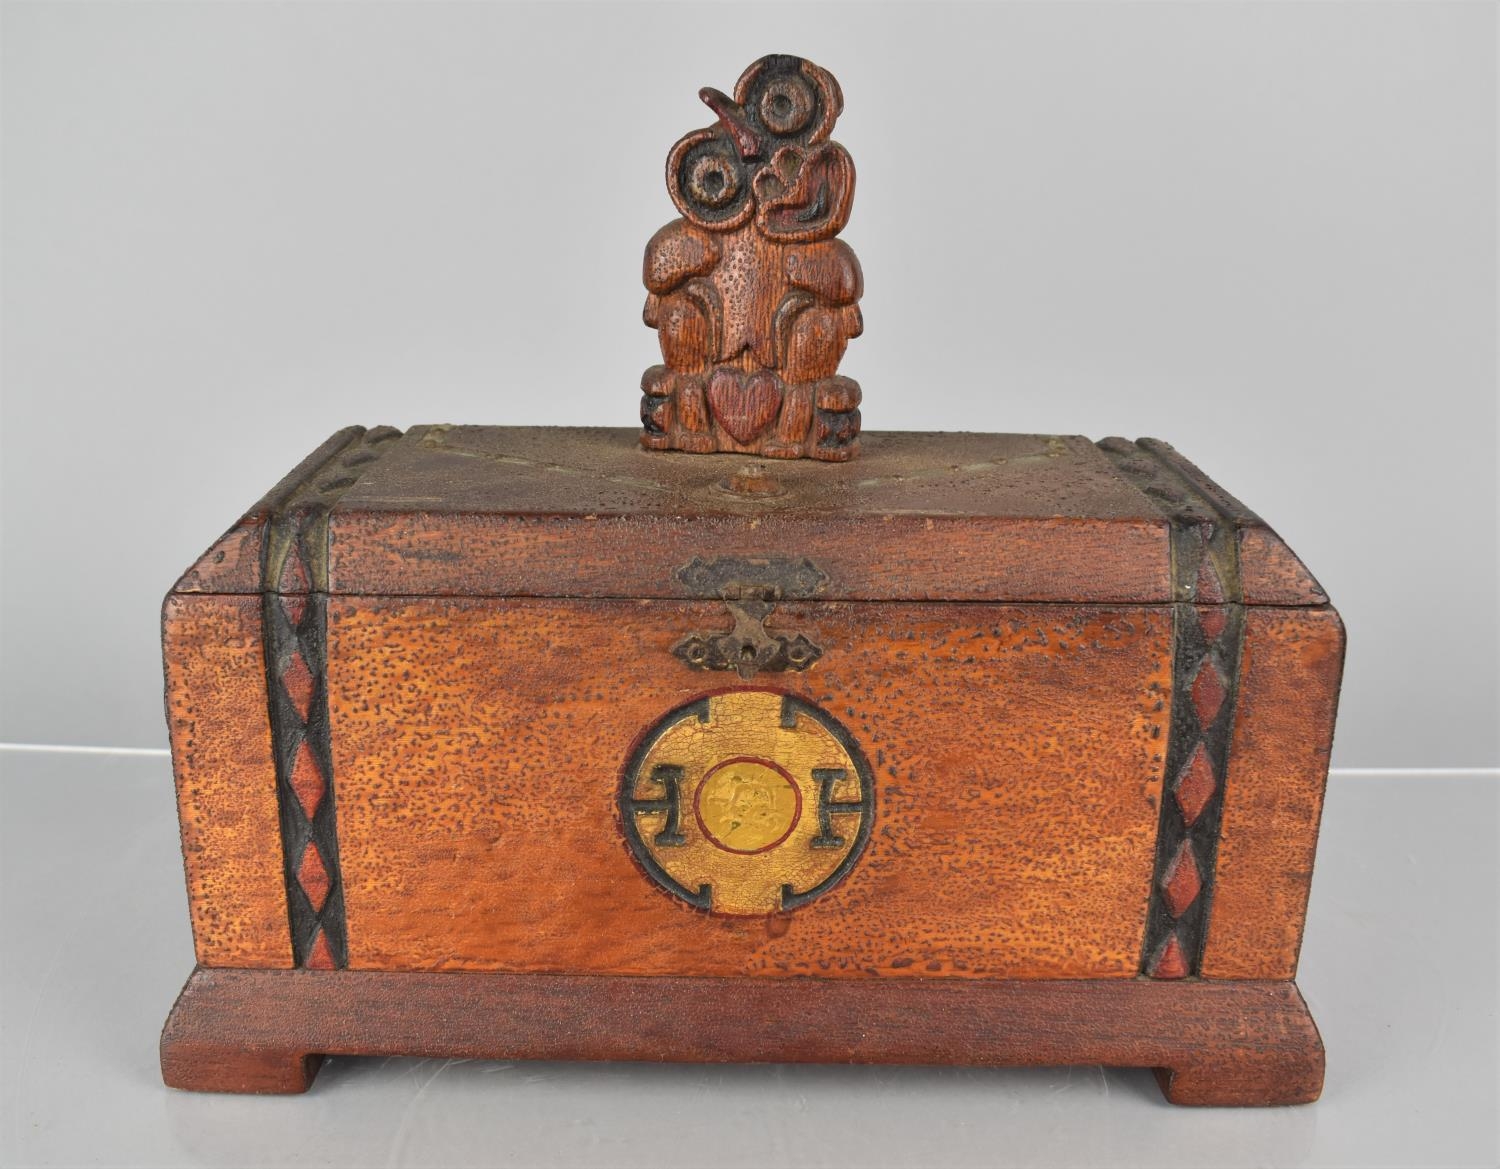 An Early 20th Century New Zealand Maori Carved Wooden Box, Top Decorated with a Carved Hei-Tiki - Image 5 of 6